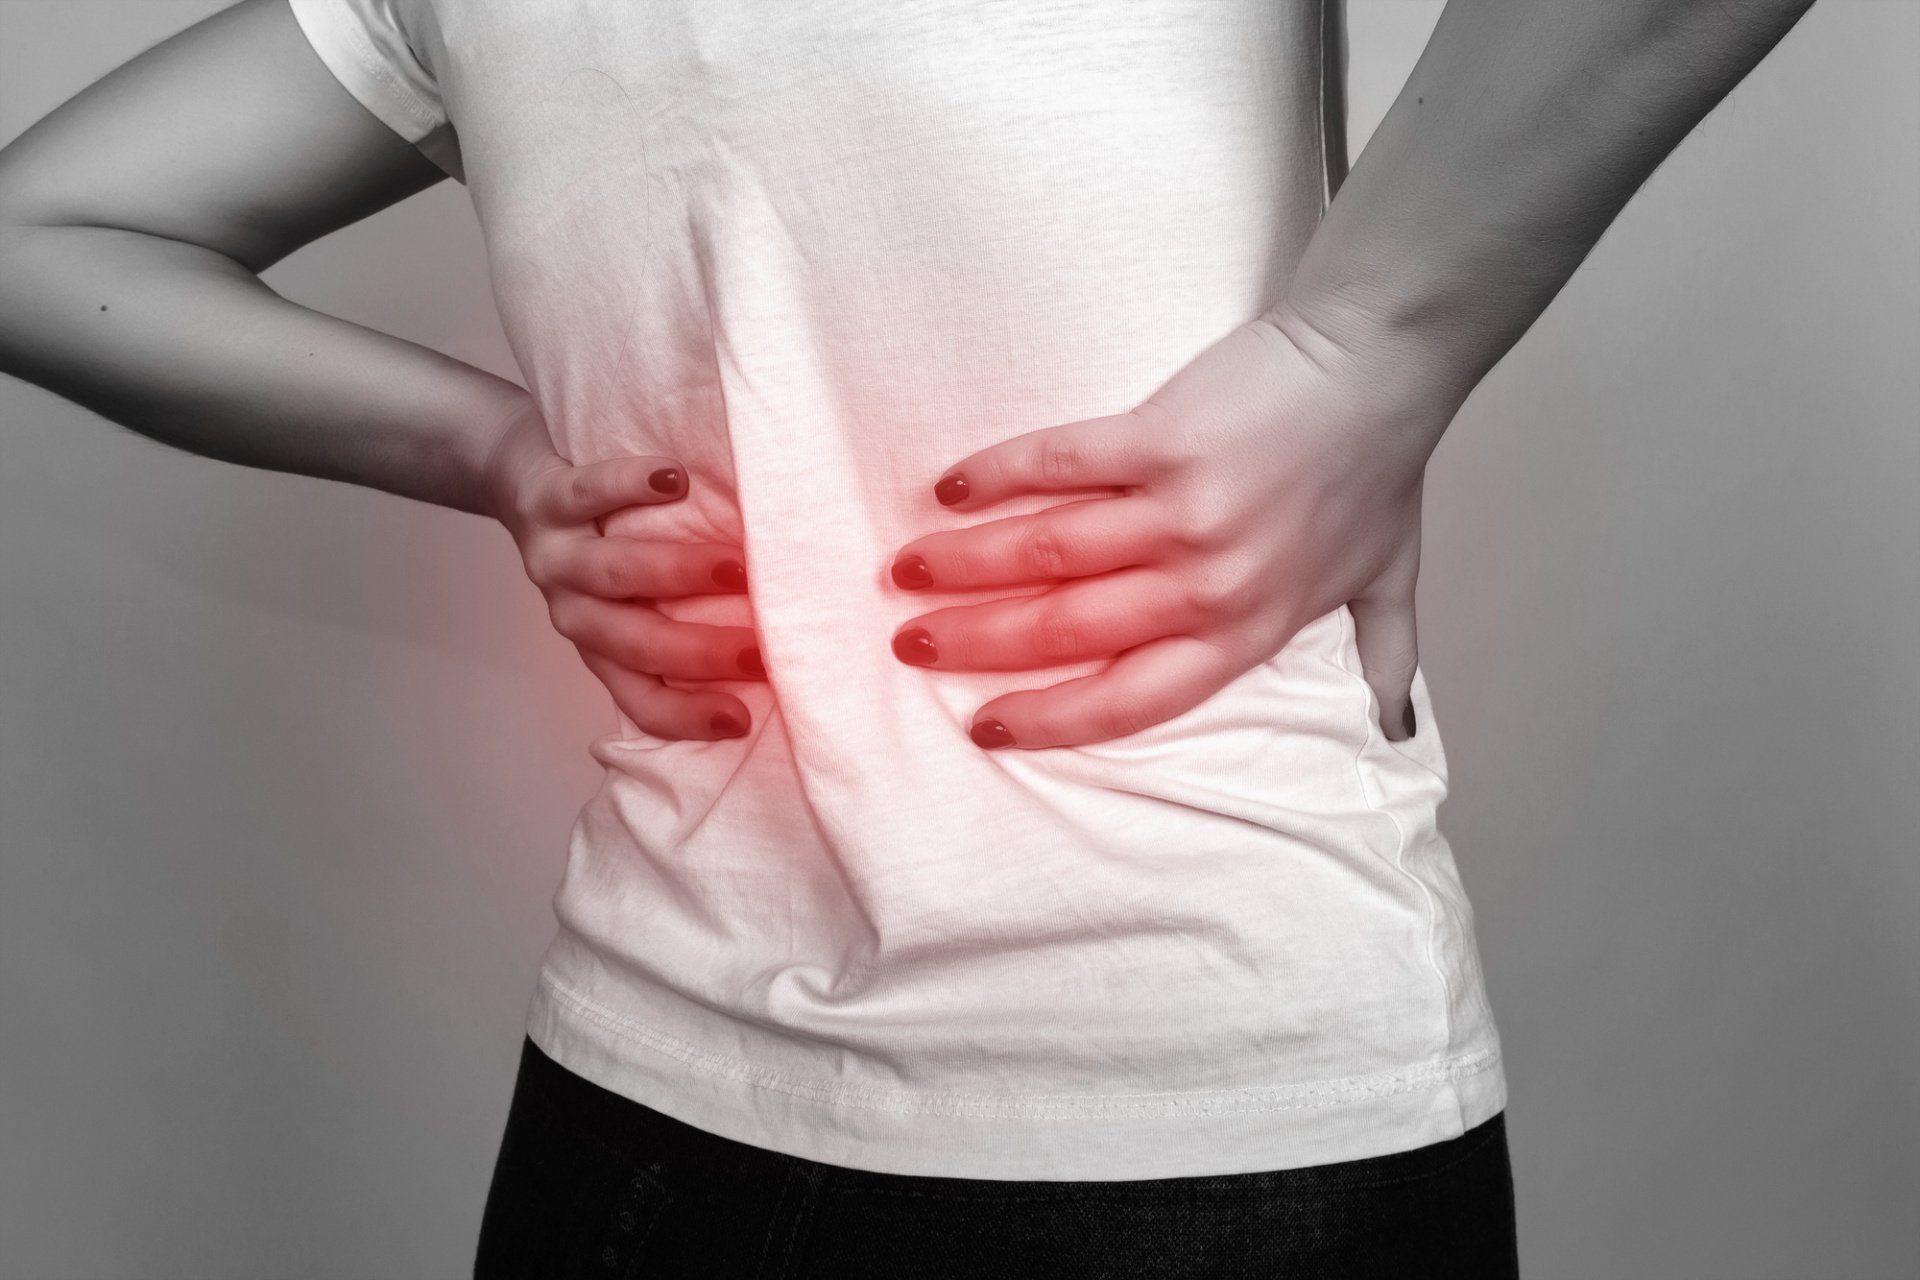 Managing Your Pain: The Benefits of Seeing a Chiropractor for Sciatica